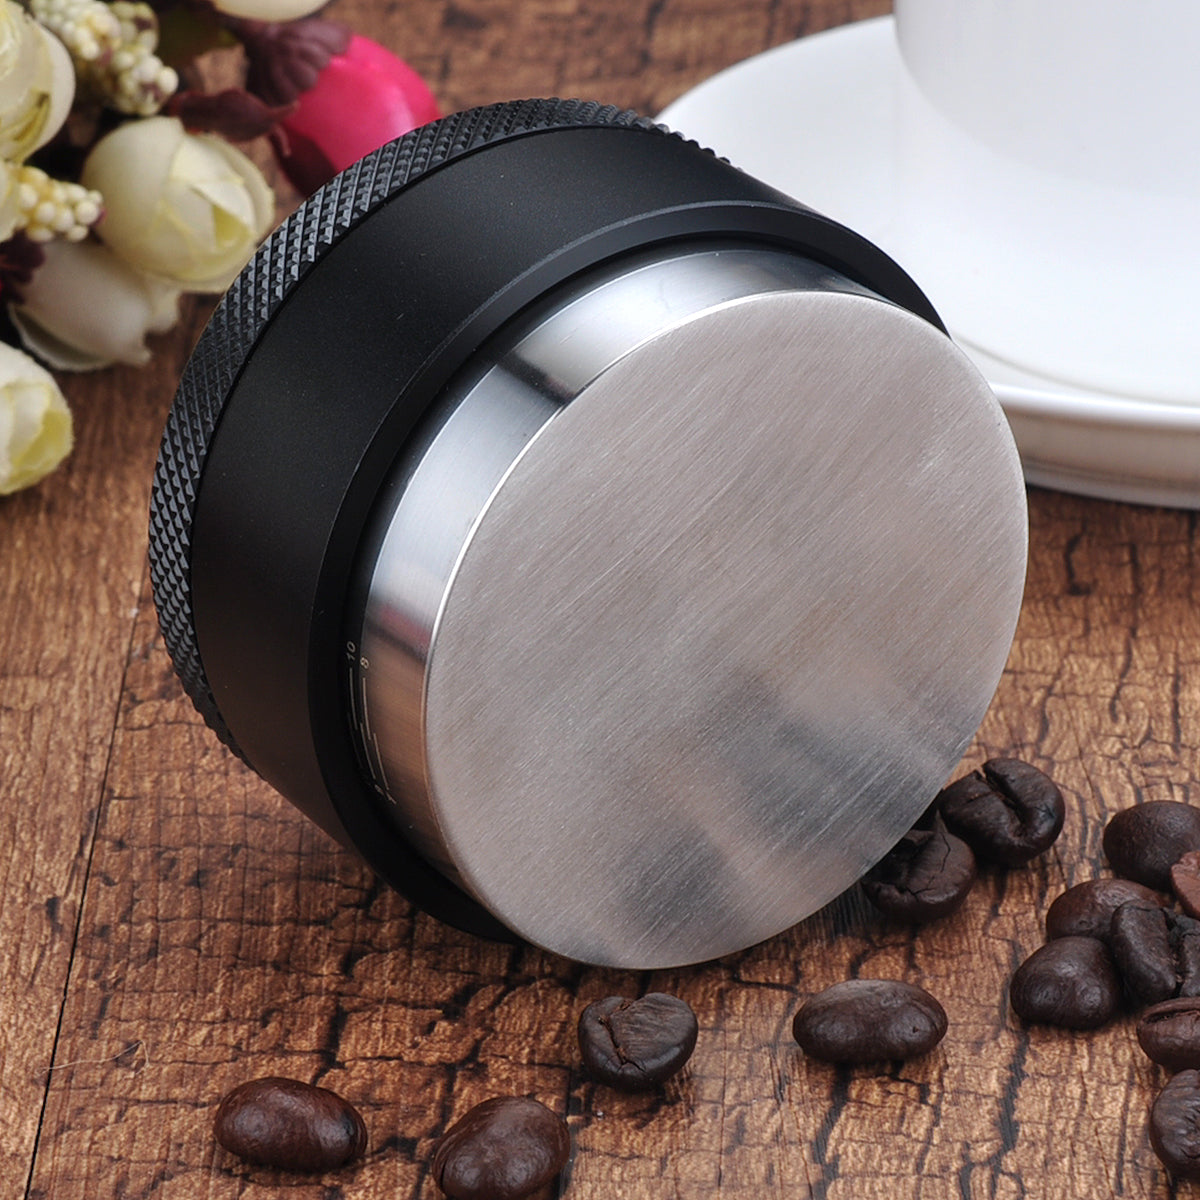 https://cdn.shopifycdn.net/s/files/1/1921/8479/products/adjustable_coffee_tampers_276235f3-3ea1-4af1-9077-2dbcf8c05234_2048x2048.jpg?v=1584245671